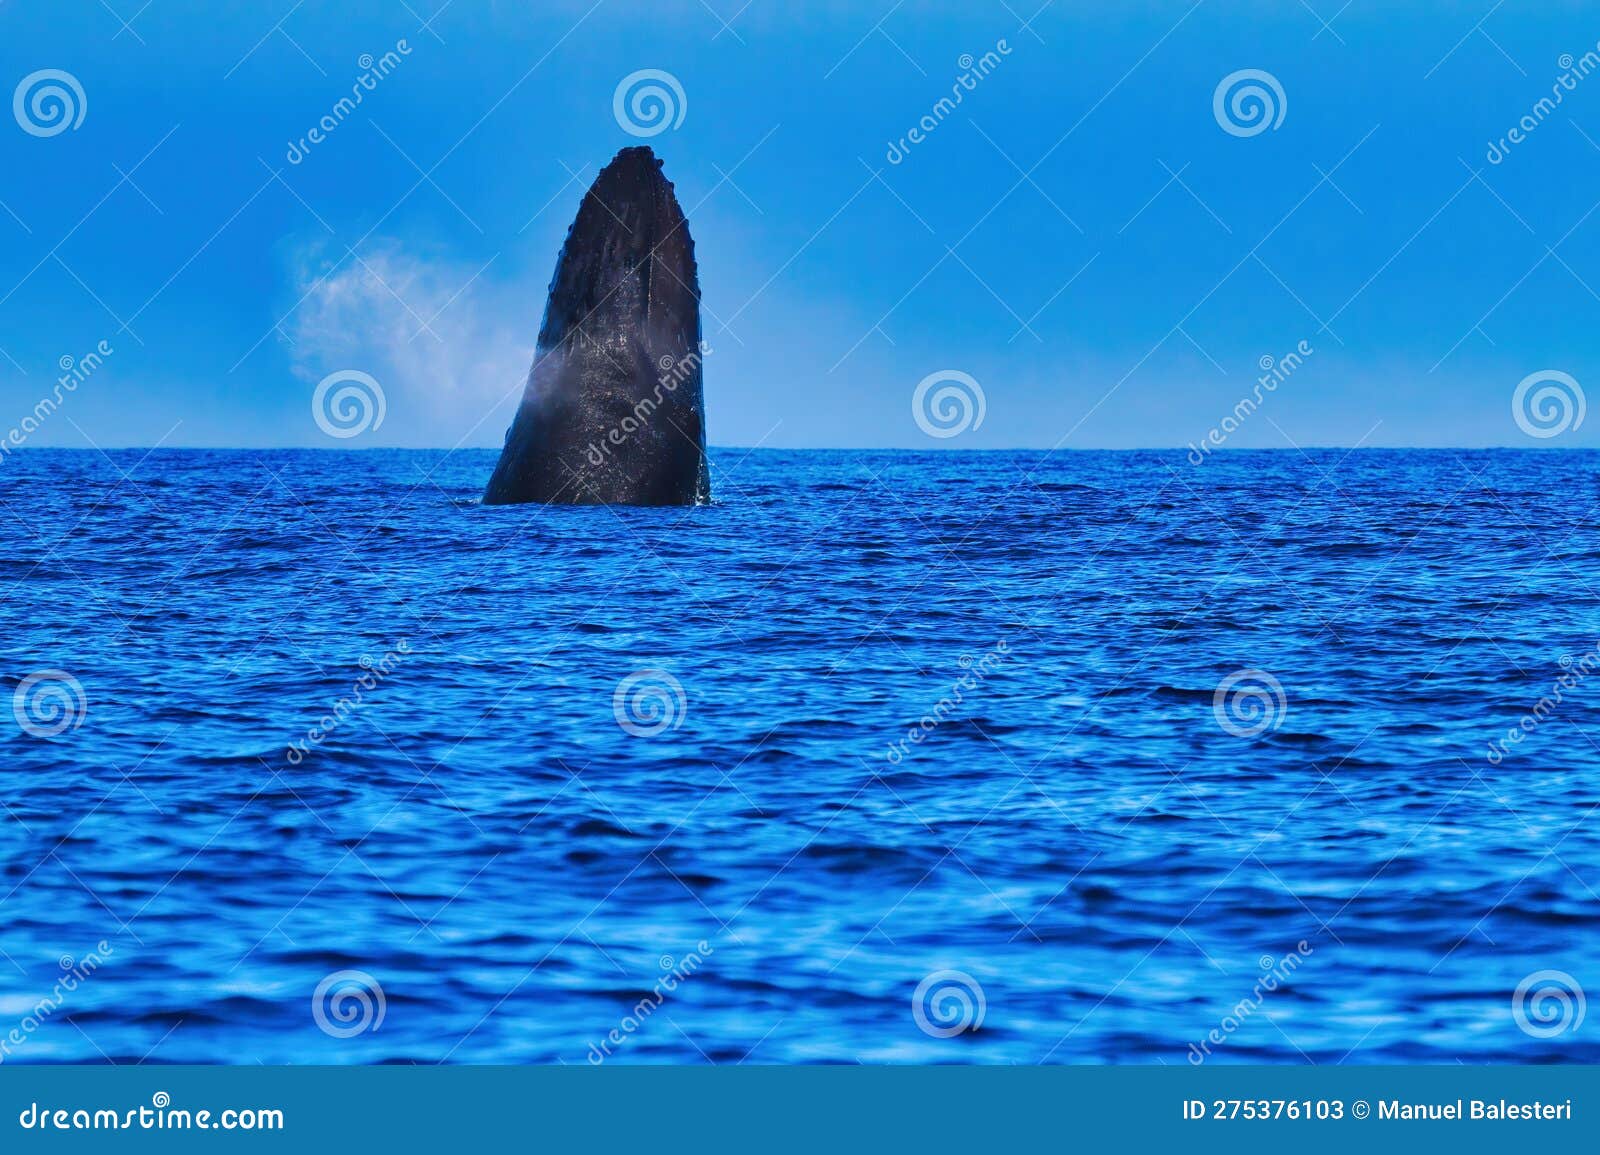 Humpback Whale Exploding To the Surface. Stock Image - Image of blue ...